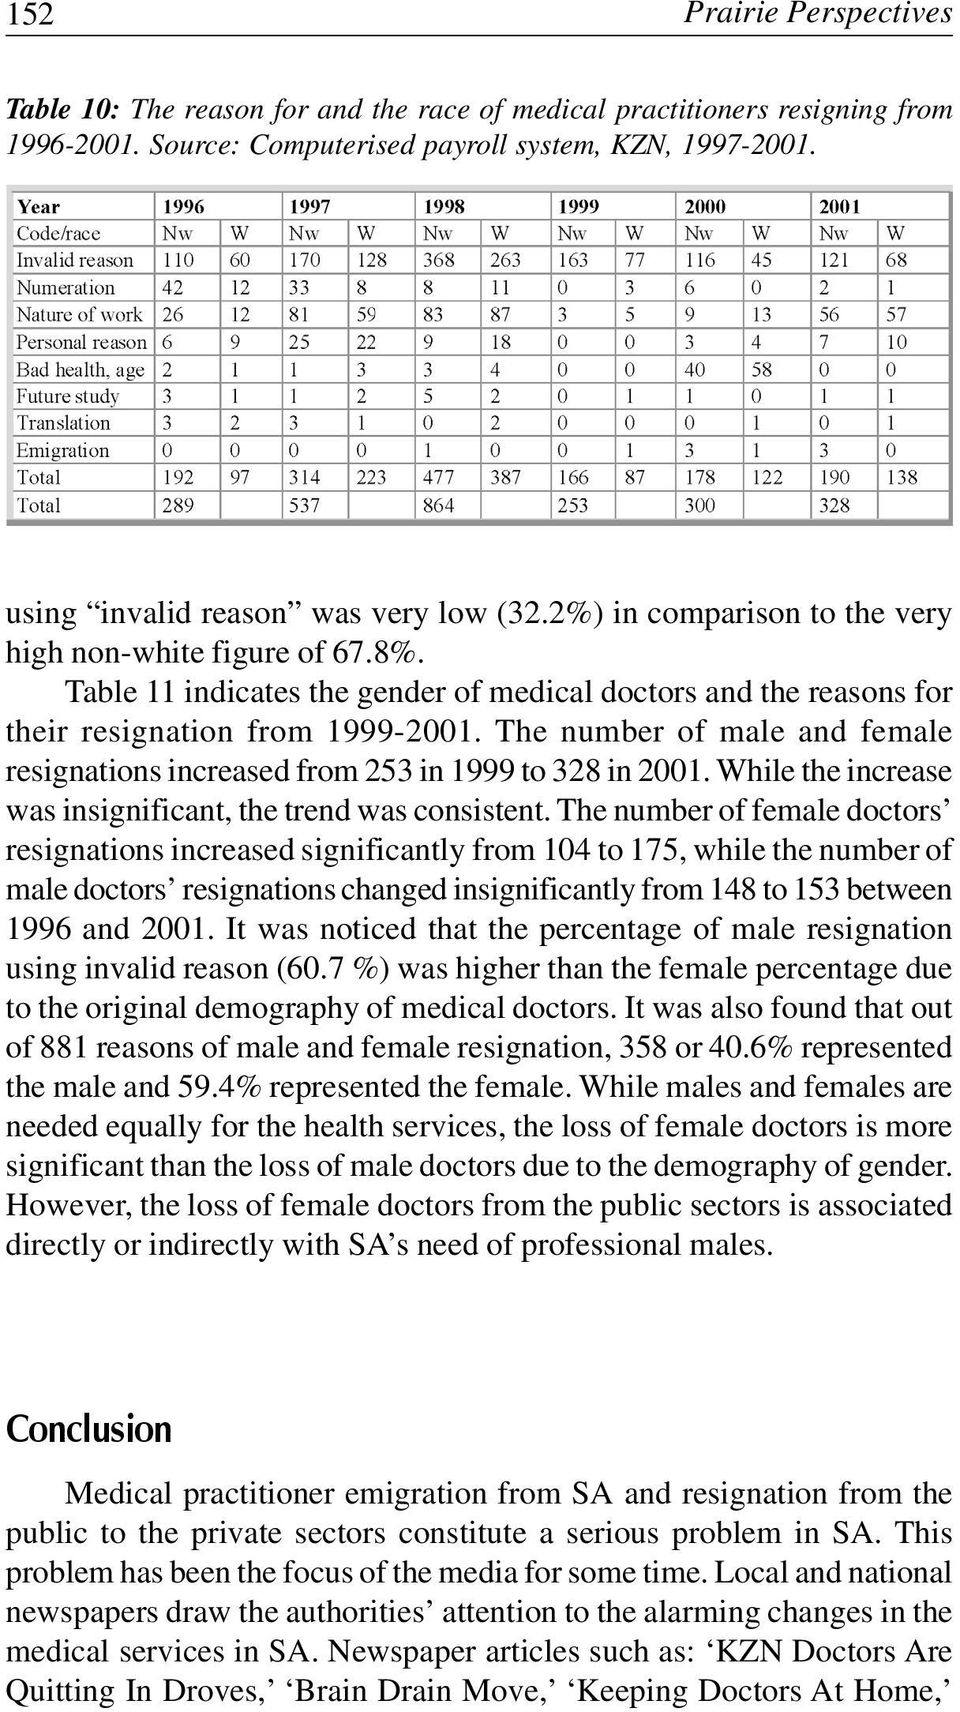 Table 11 indicates the gender of medical doctors and the reasons for their resignation from 1999-2001. The number of male and female resignations increased from 253 in 1999 to 328 in 2001.